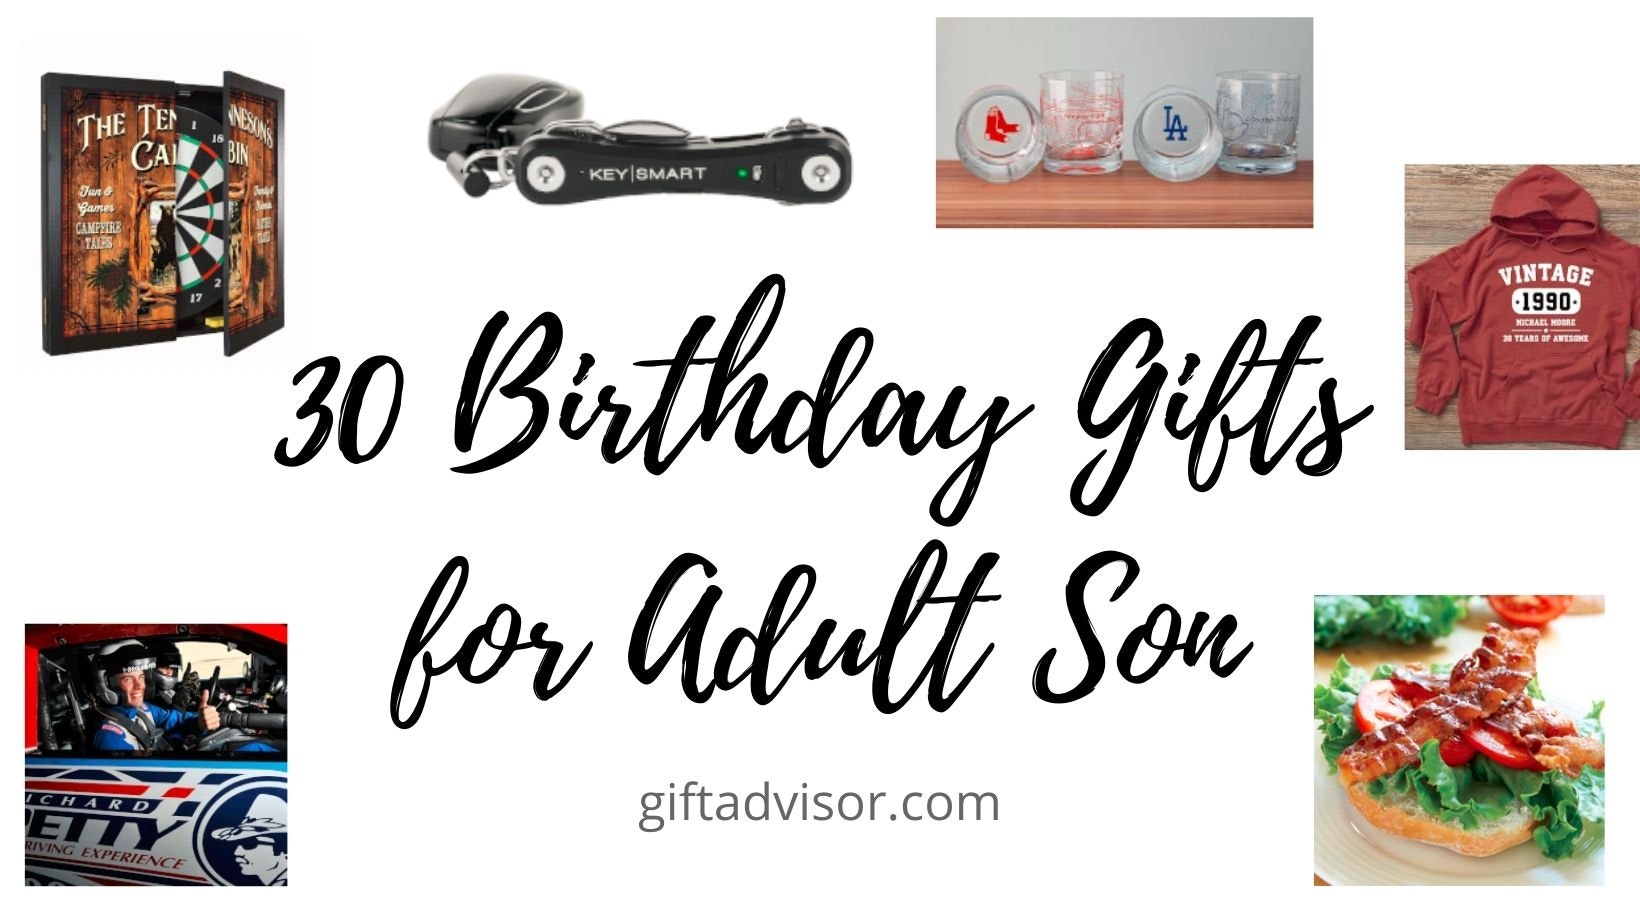 https://giftadvisor.imgix.net/blog-images/30-birthday-gifts-for-adult-son.jpg?fit=crop&max-w=600&max-h=315